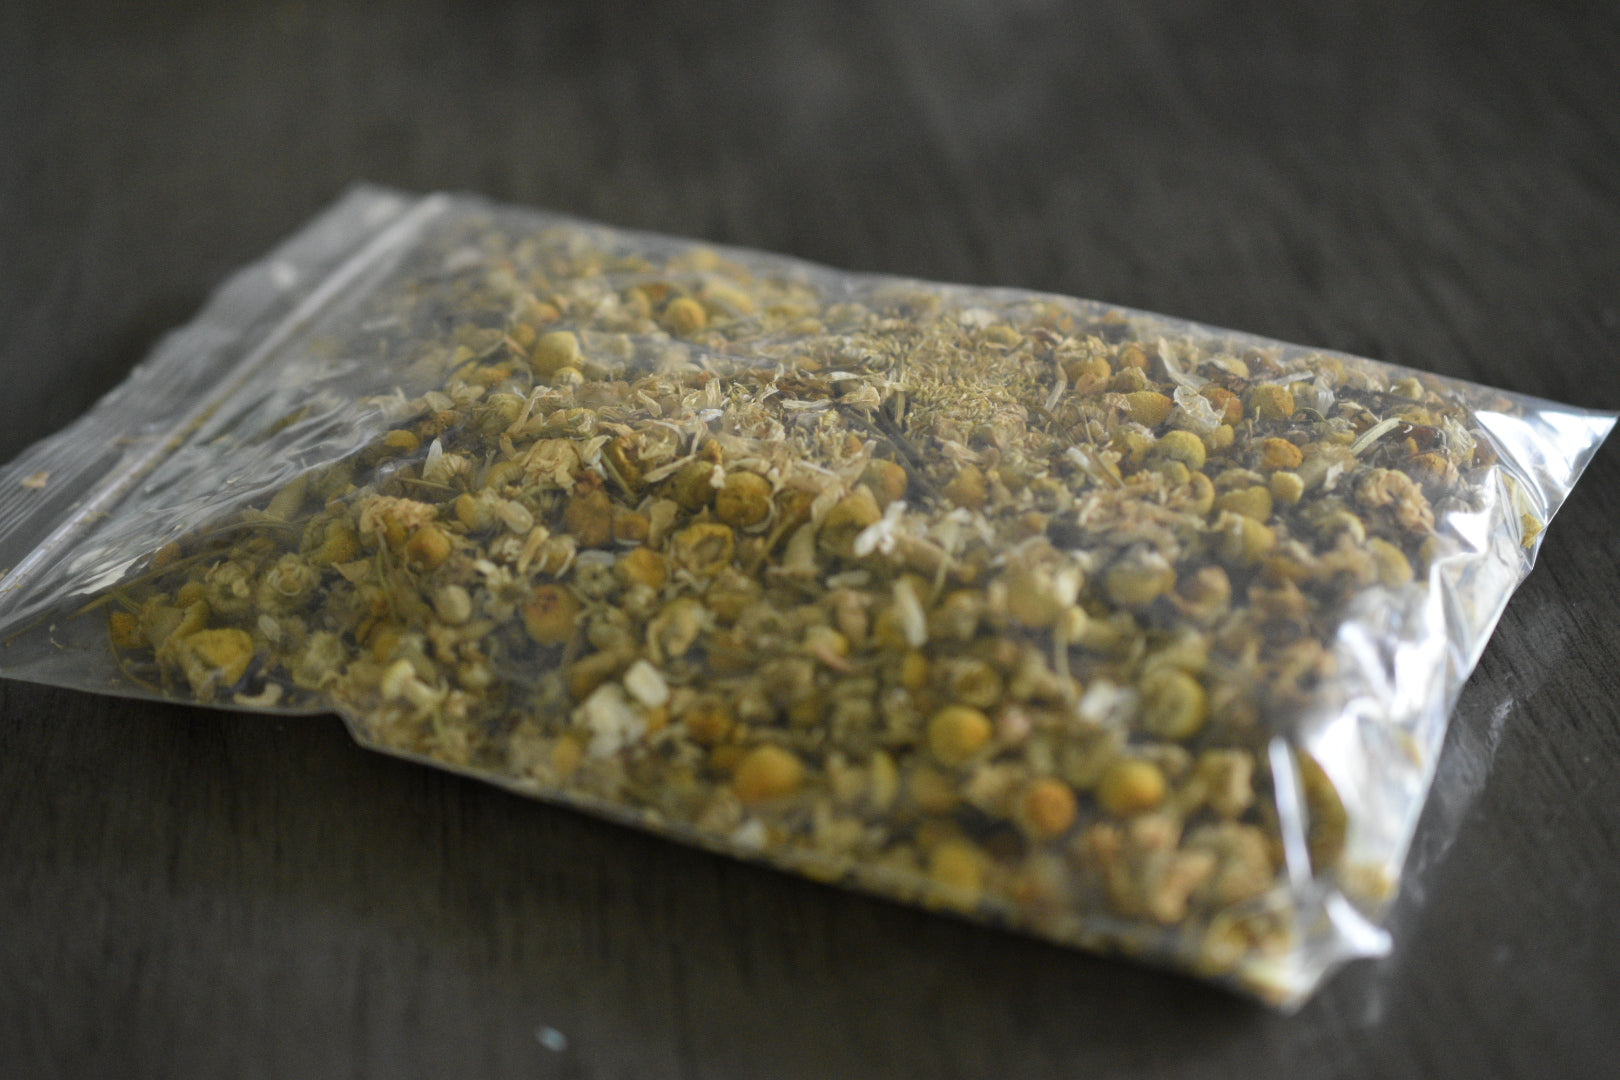 A plastic bag filled with light yellow chamomile buds rests on a wooden surface to show the packaged product.